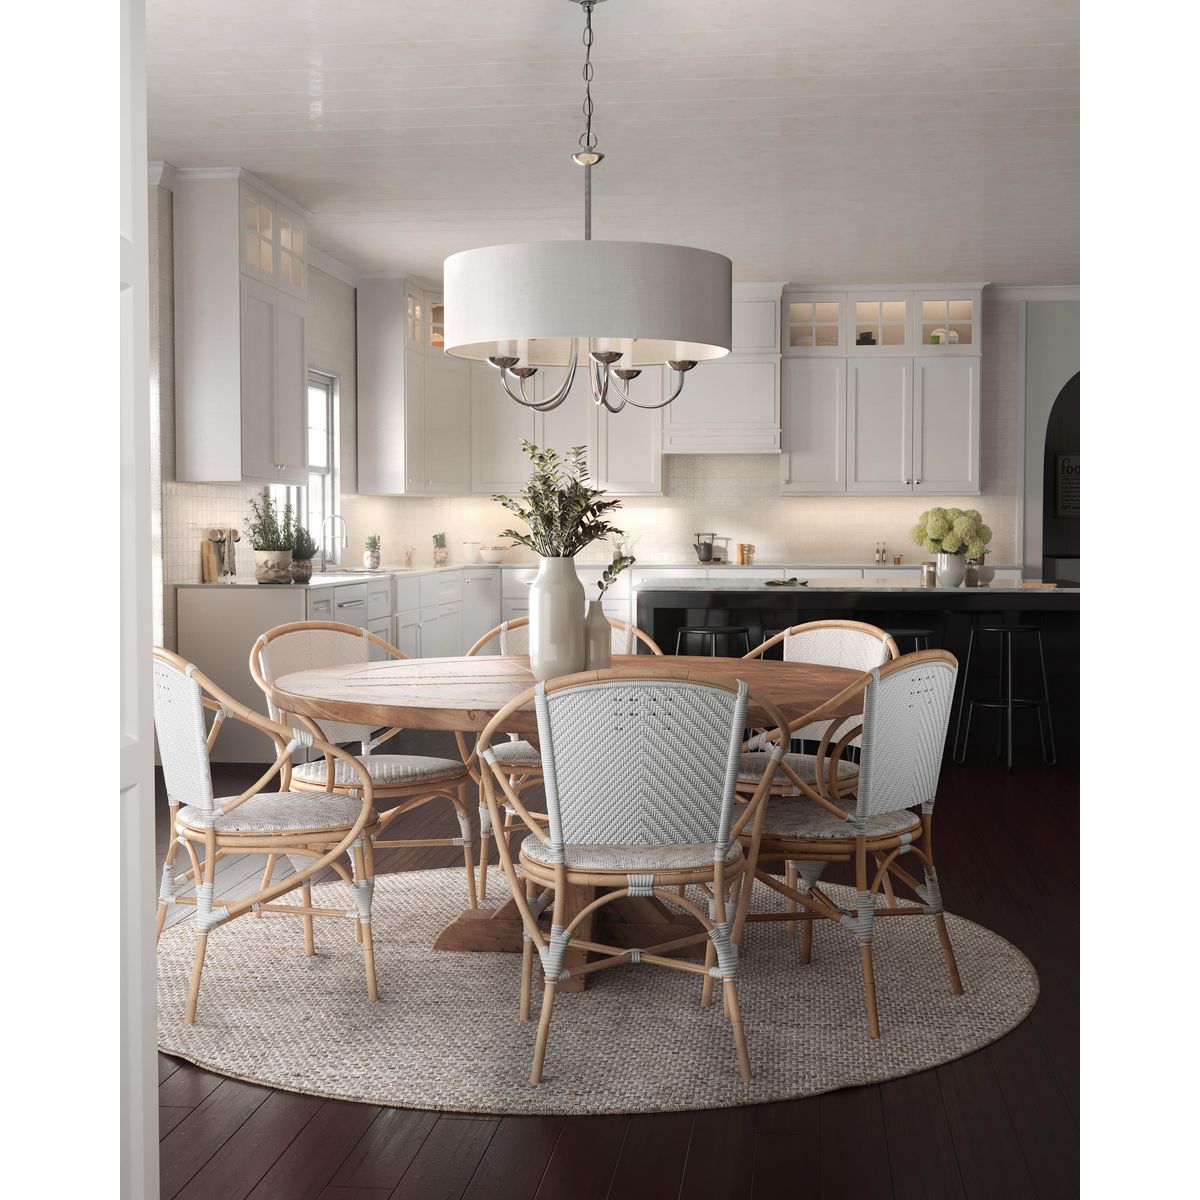 Drum Shade Collection Five Light, Drum Chandelier For Kitchen Table